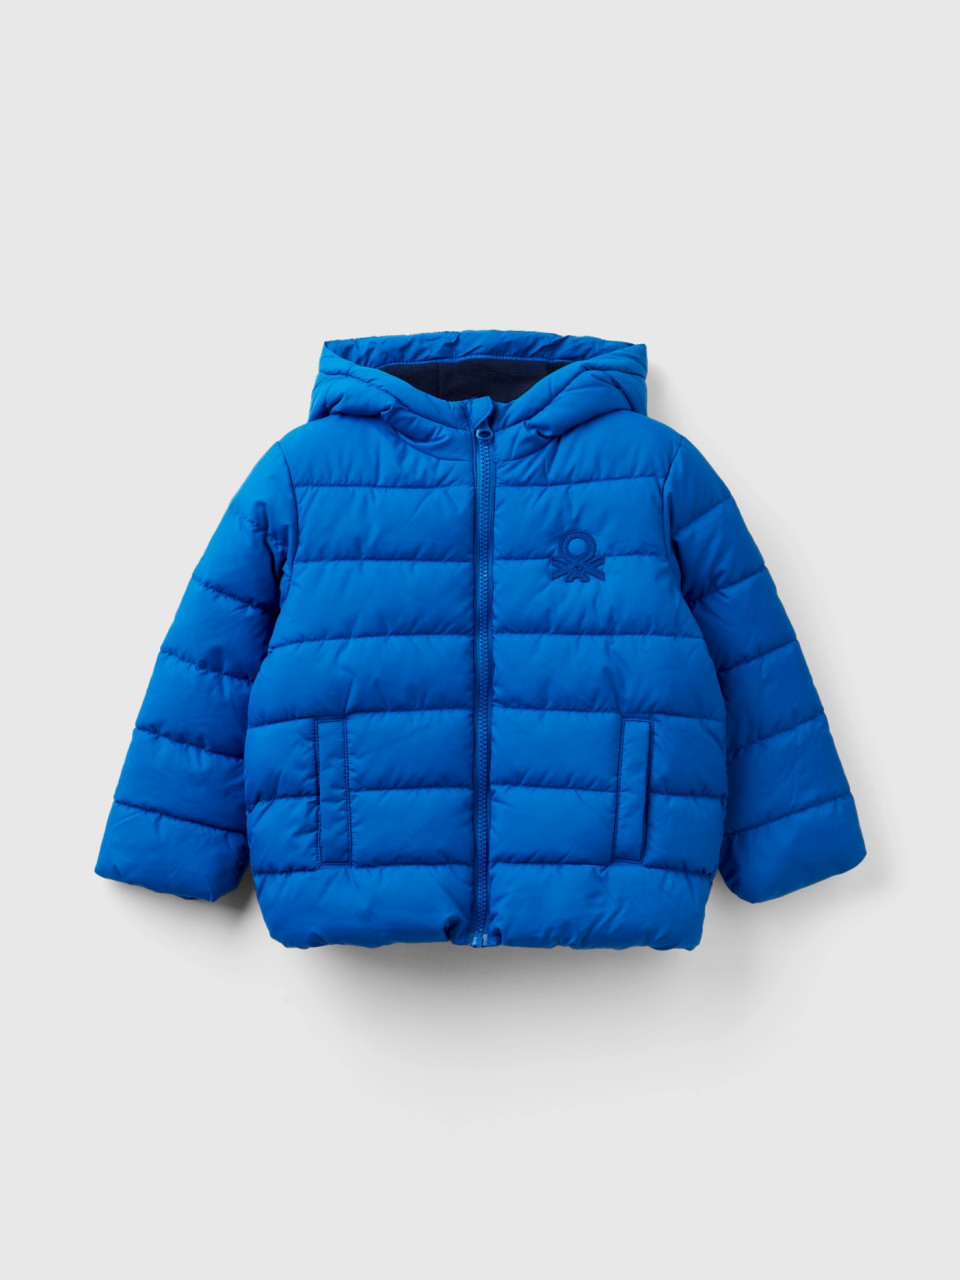 Benetton, Puffer Jacket With Hood And Logo, Bright Blue, Kids